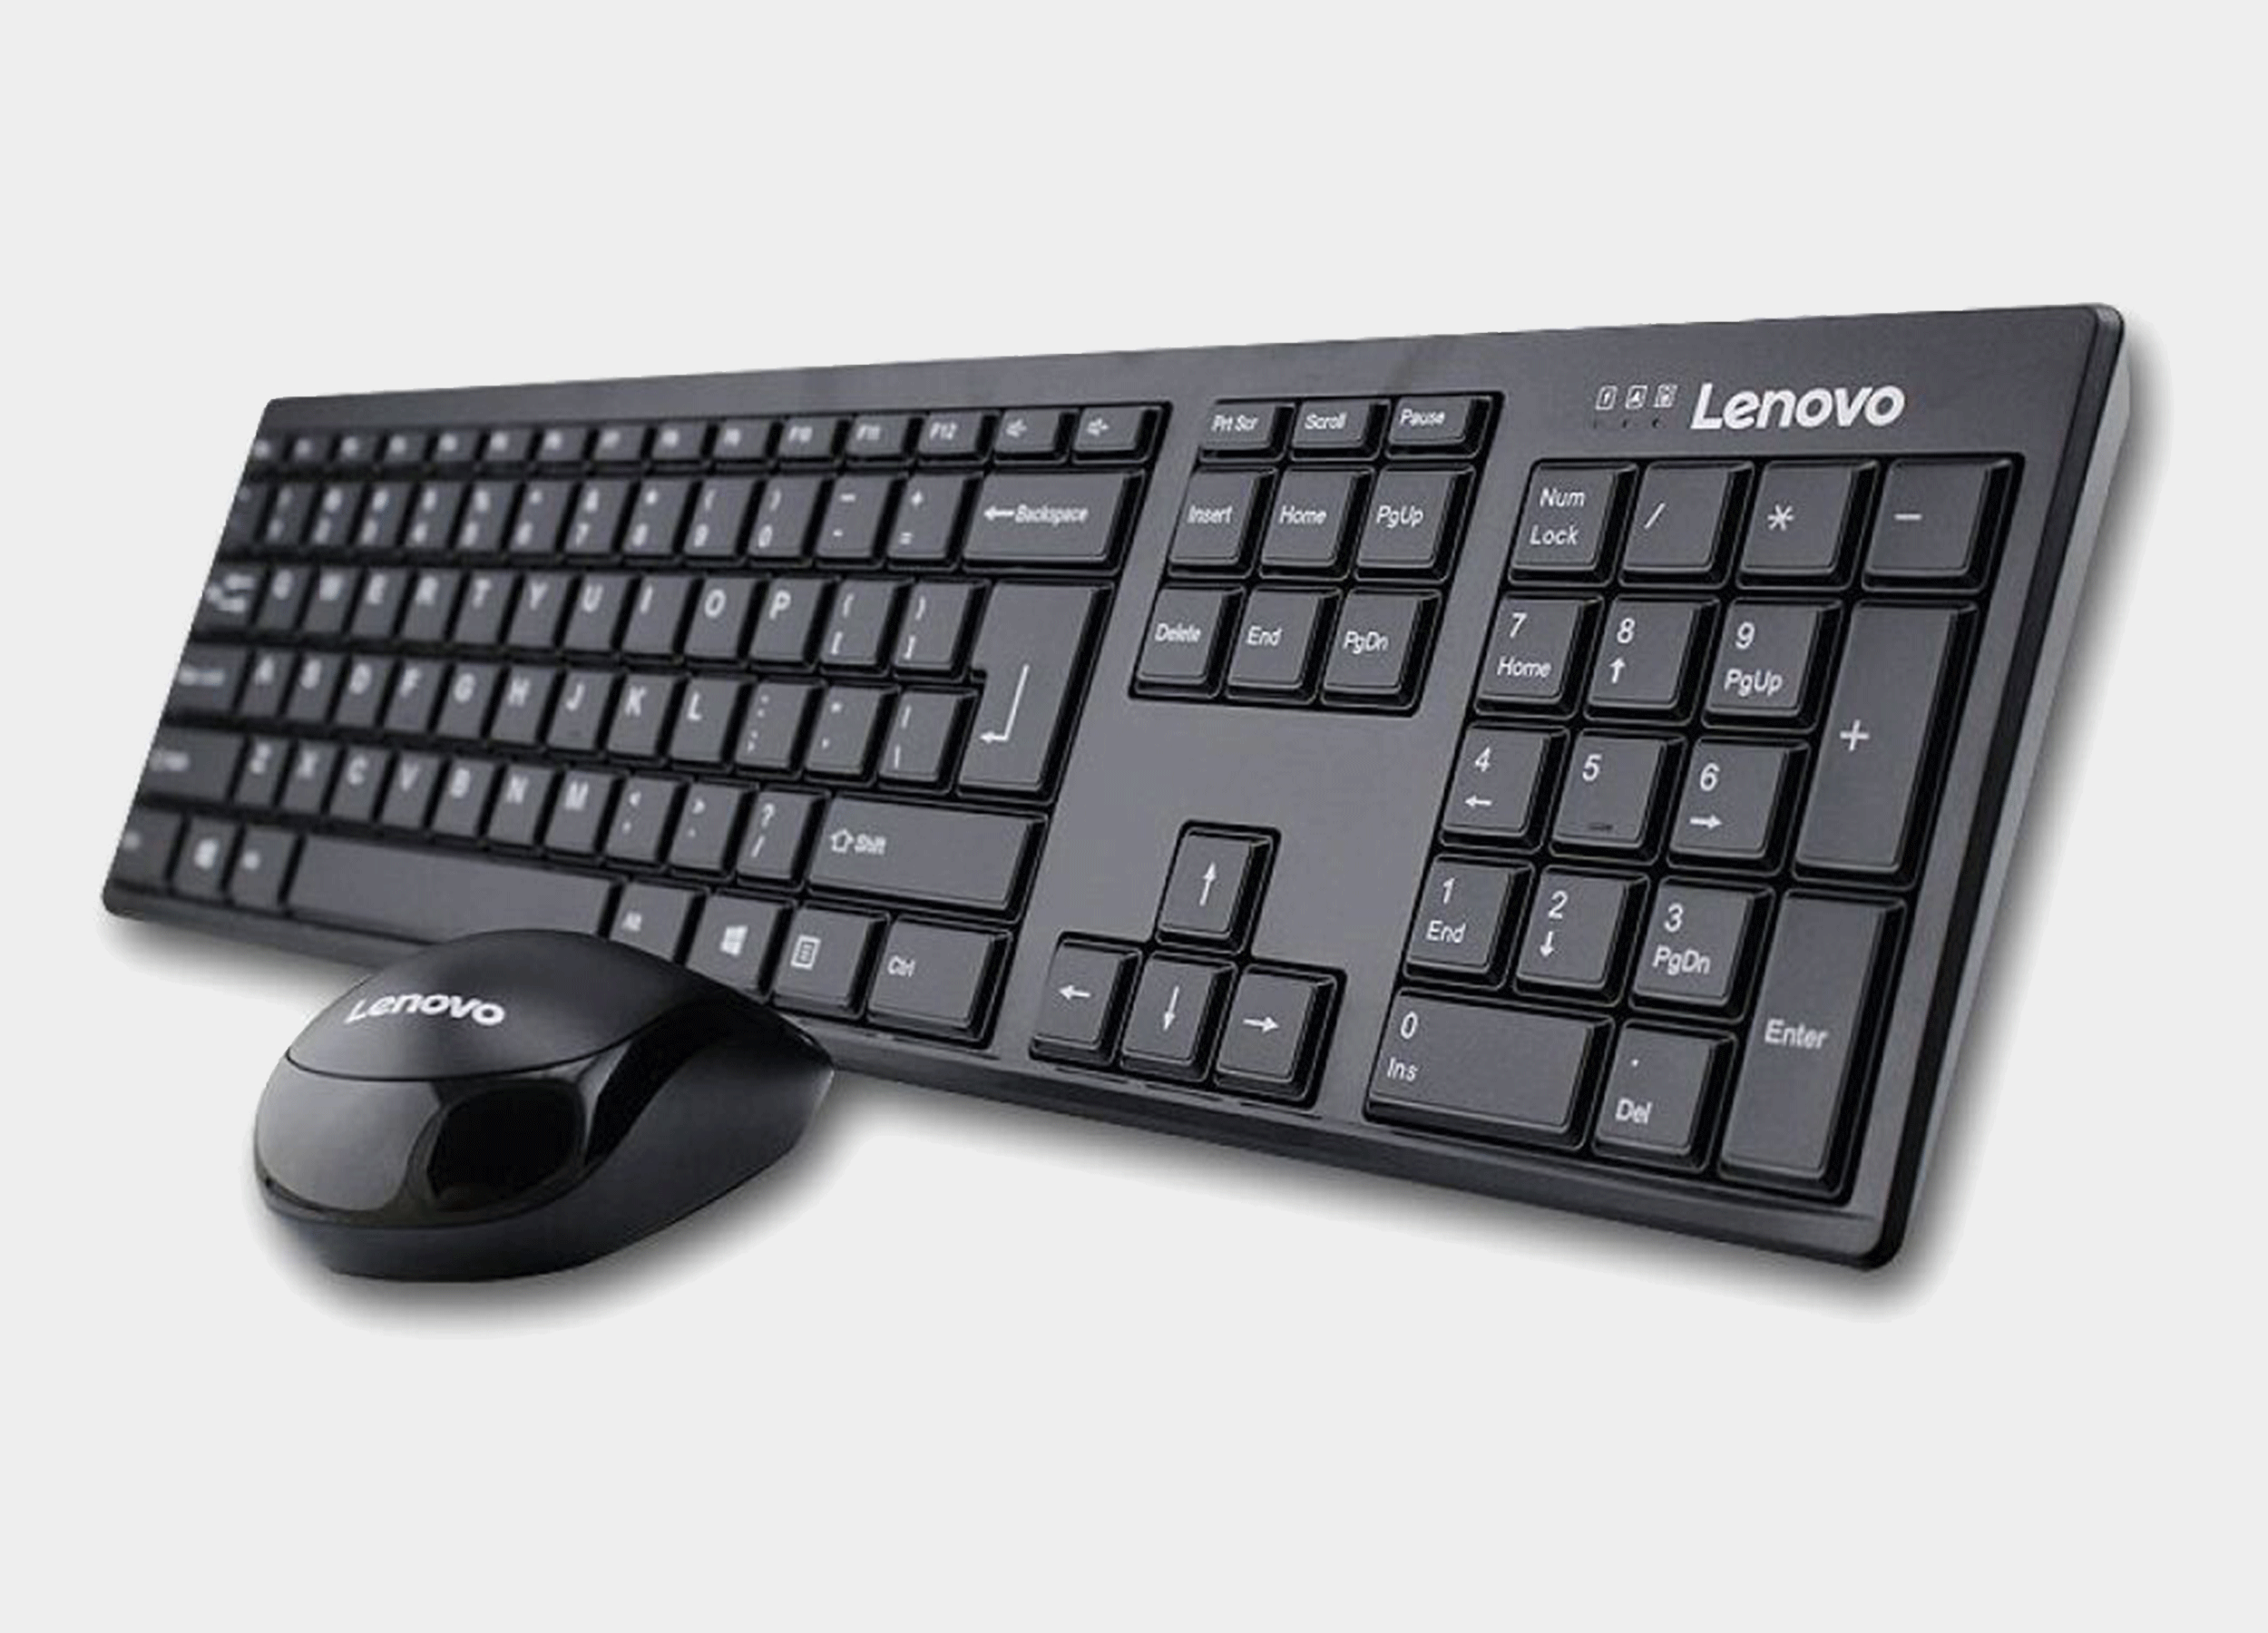 Lenovo 100 Keyboard & - MendRex - The Computer Store